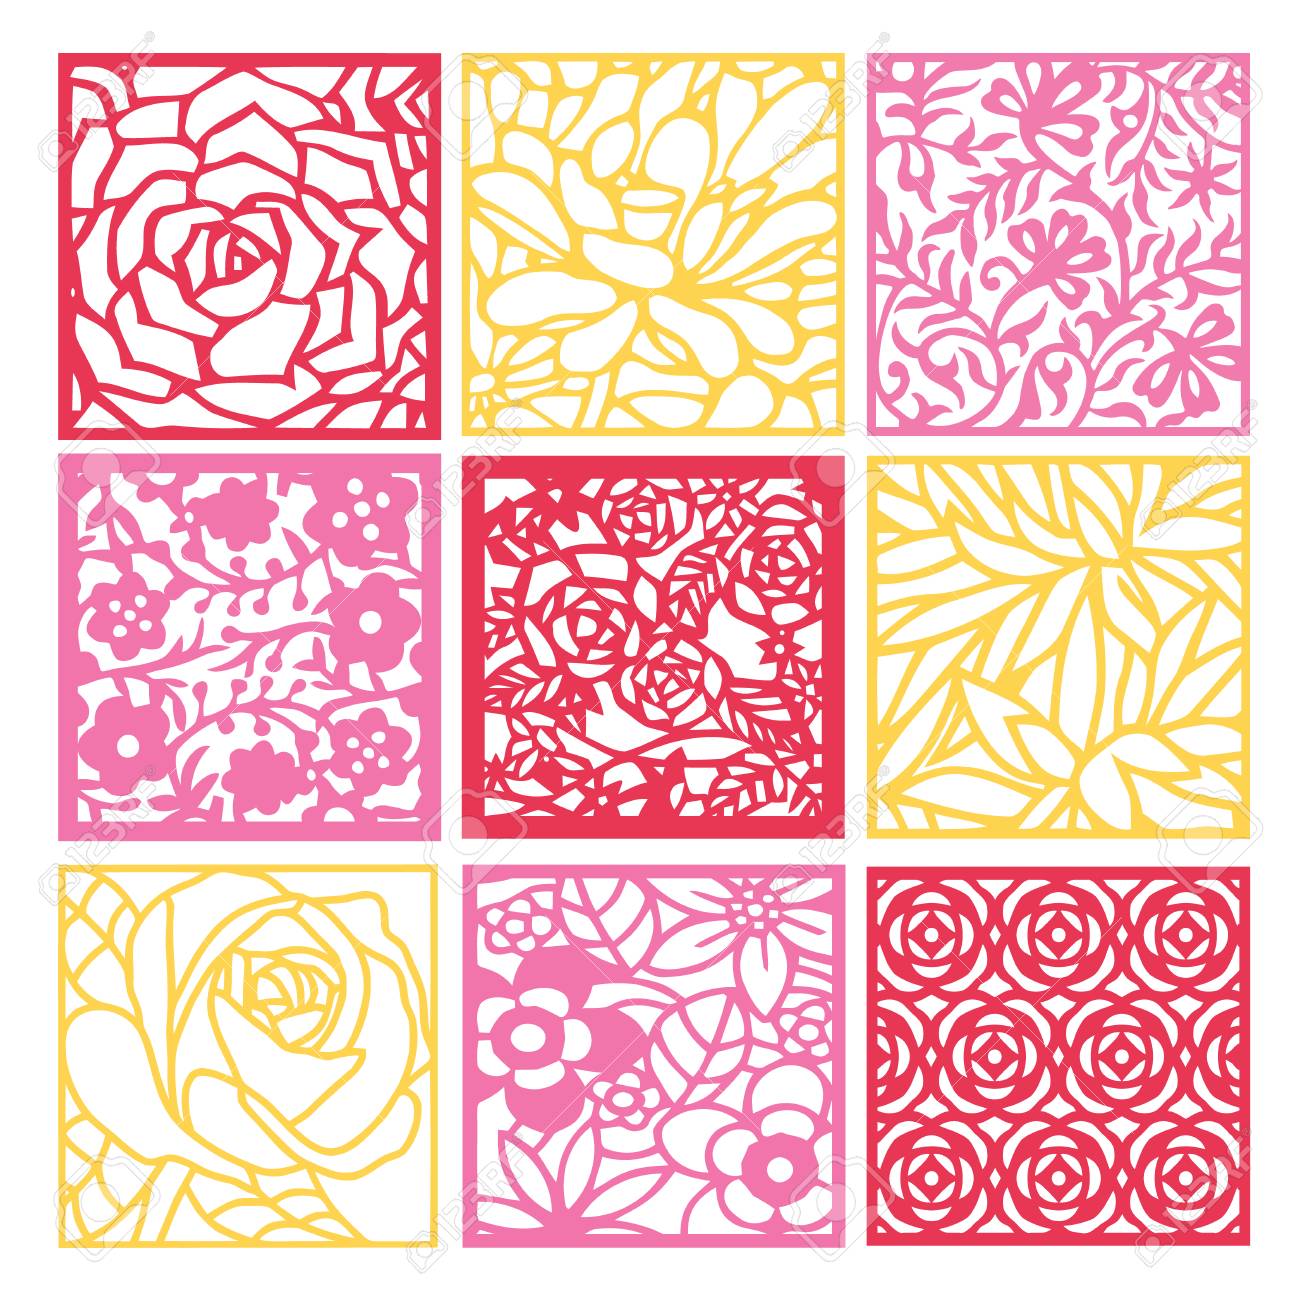 An Illustration Of Different Floral Fretwork Lattice Background